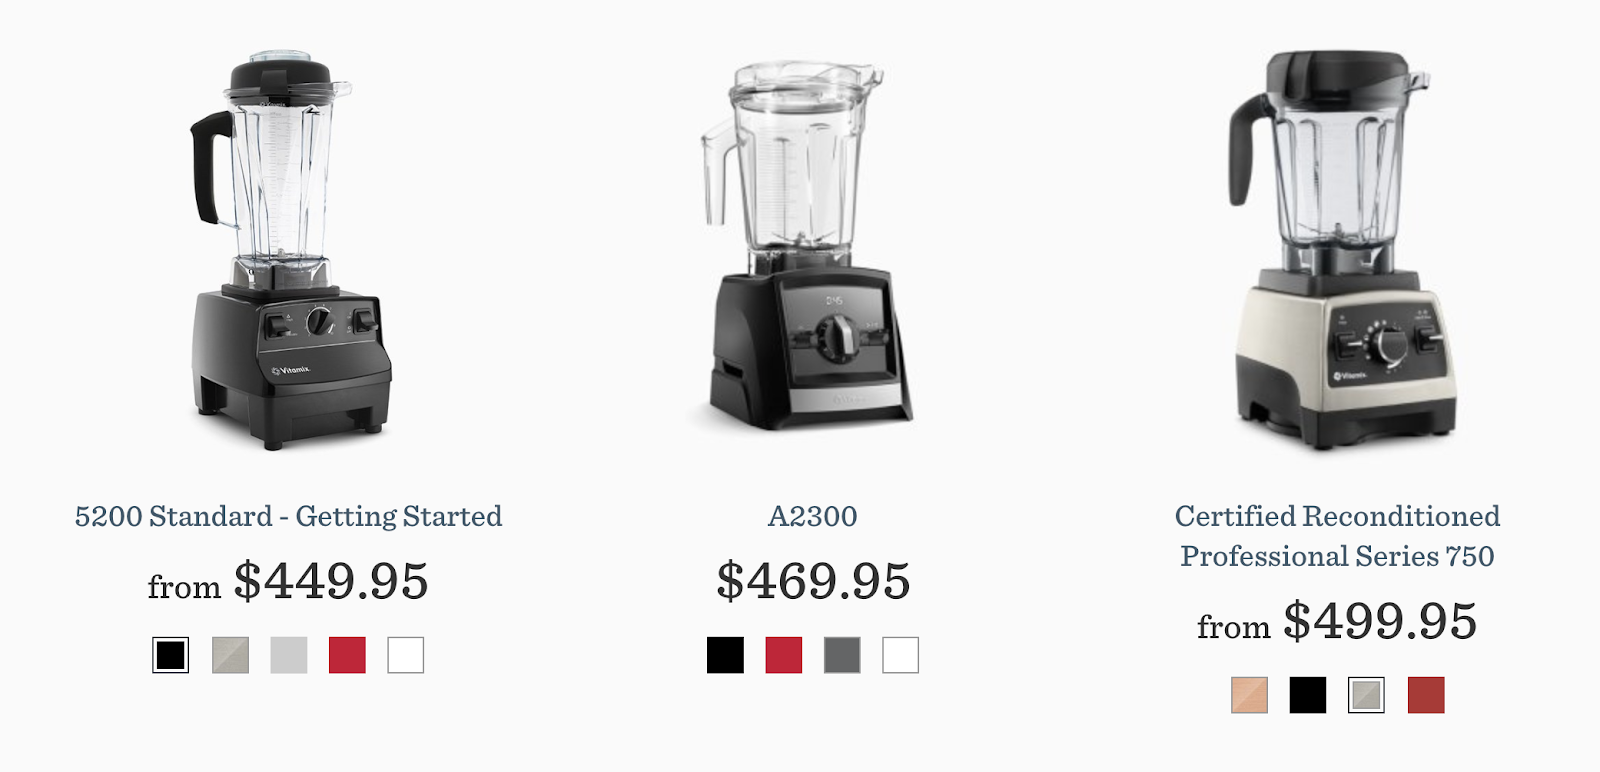 Three blenders from the Vitamix collections page.